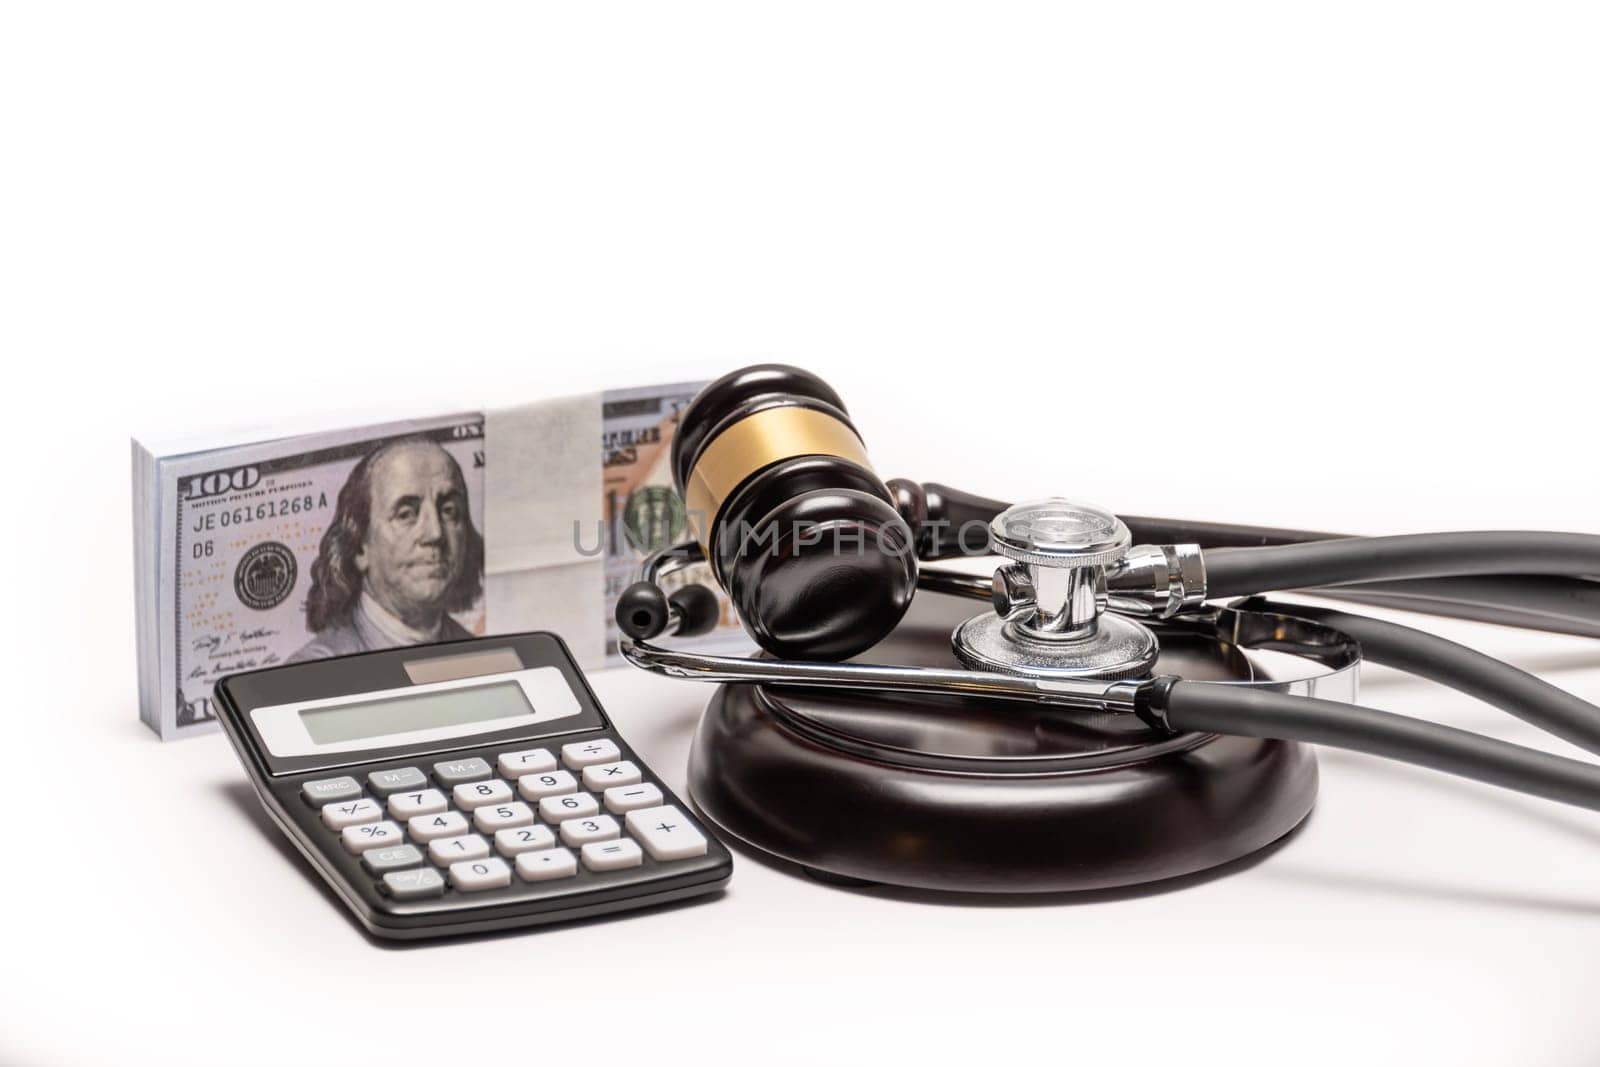 A conceptual image featuring a gavel, cash, and stethoscope symbolizing medical malpractice litigation